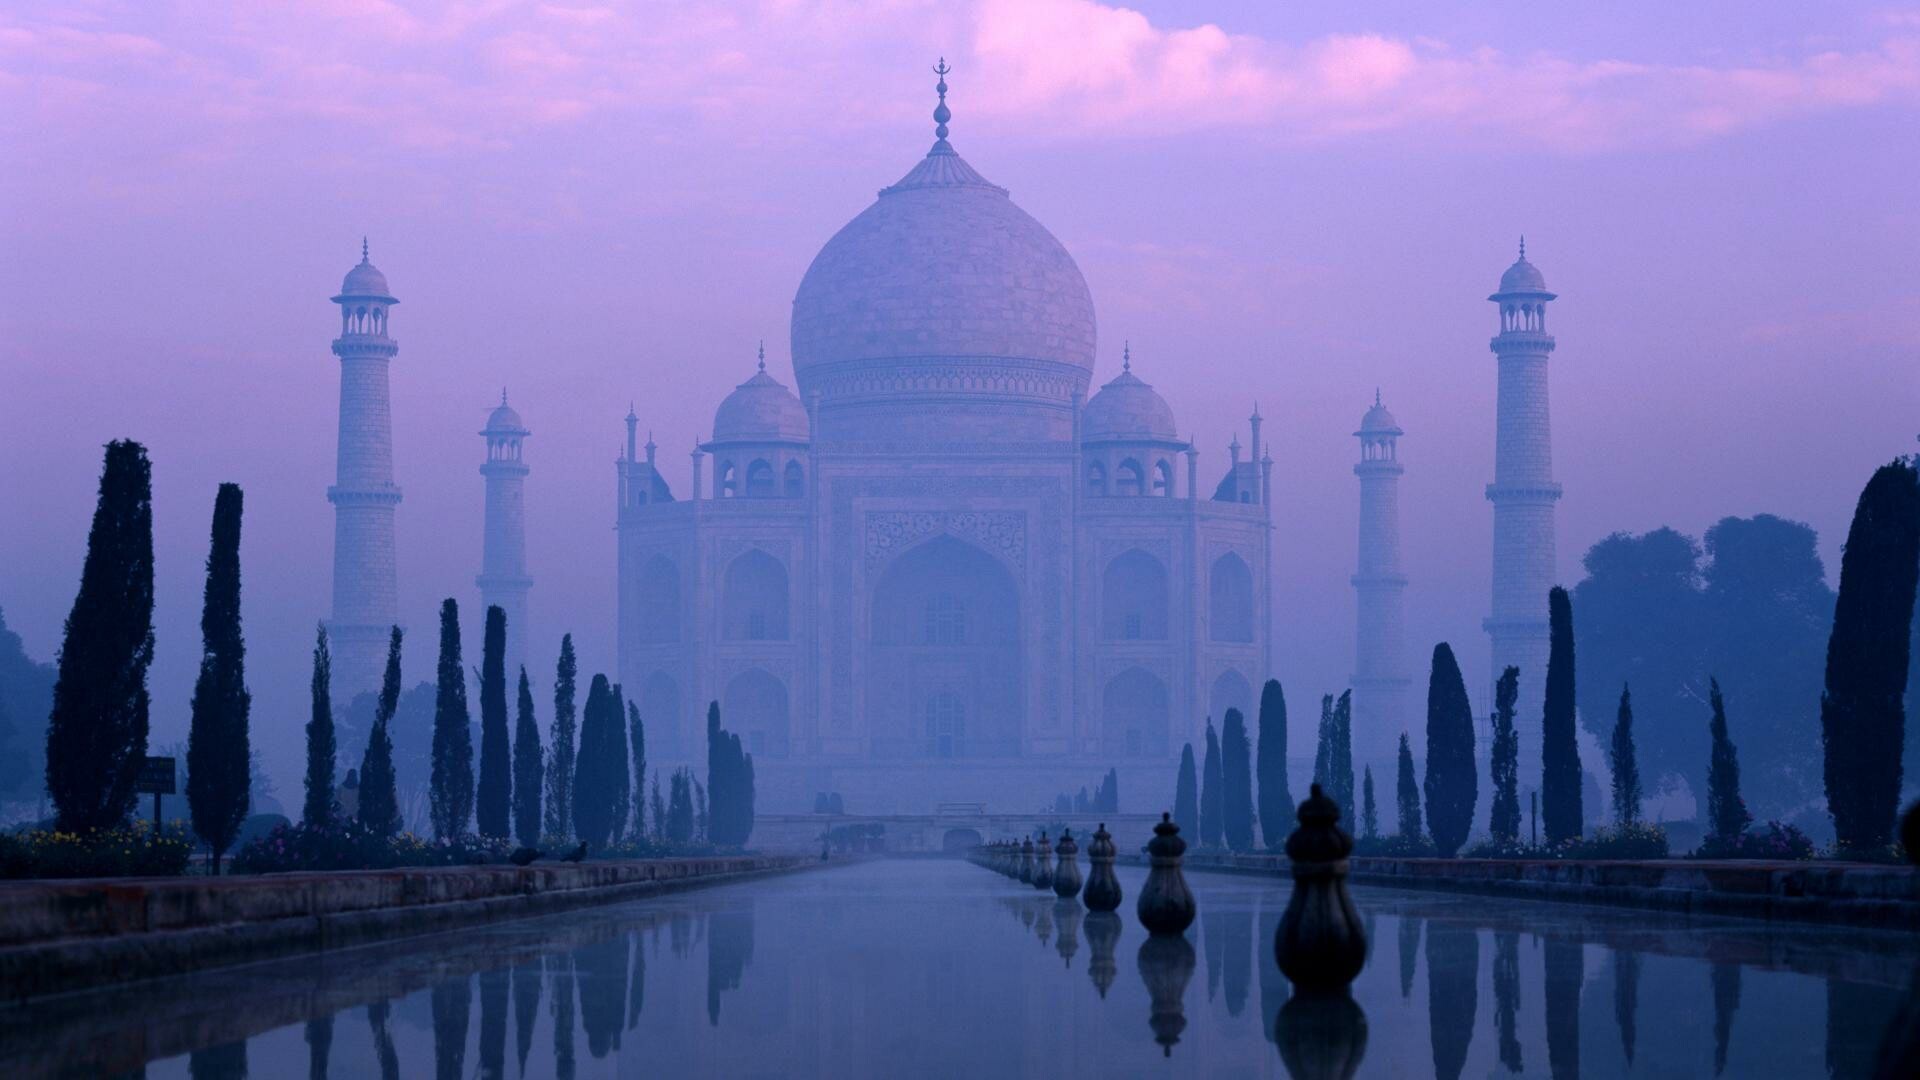 India: A mausoleum located in the city of Agra, Building, Architecture. 1920x1080 Full HD Wallpaper.